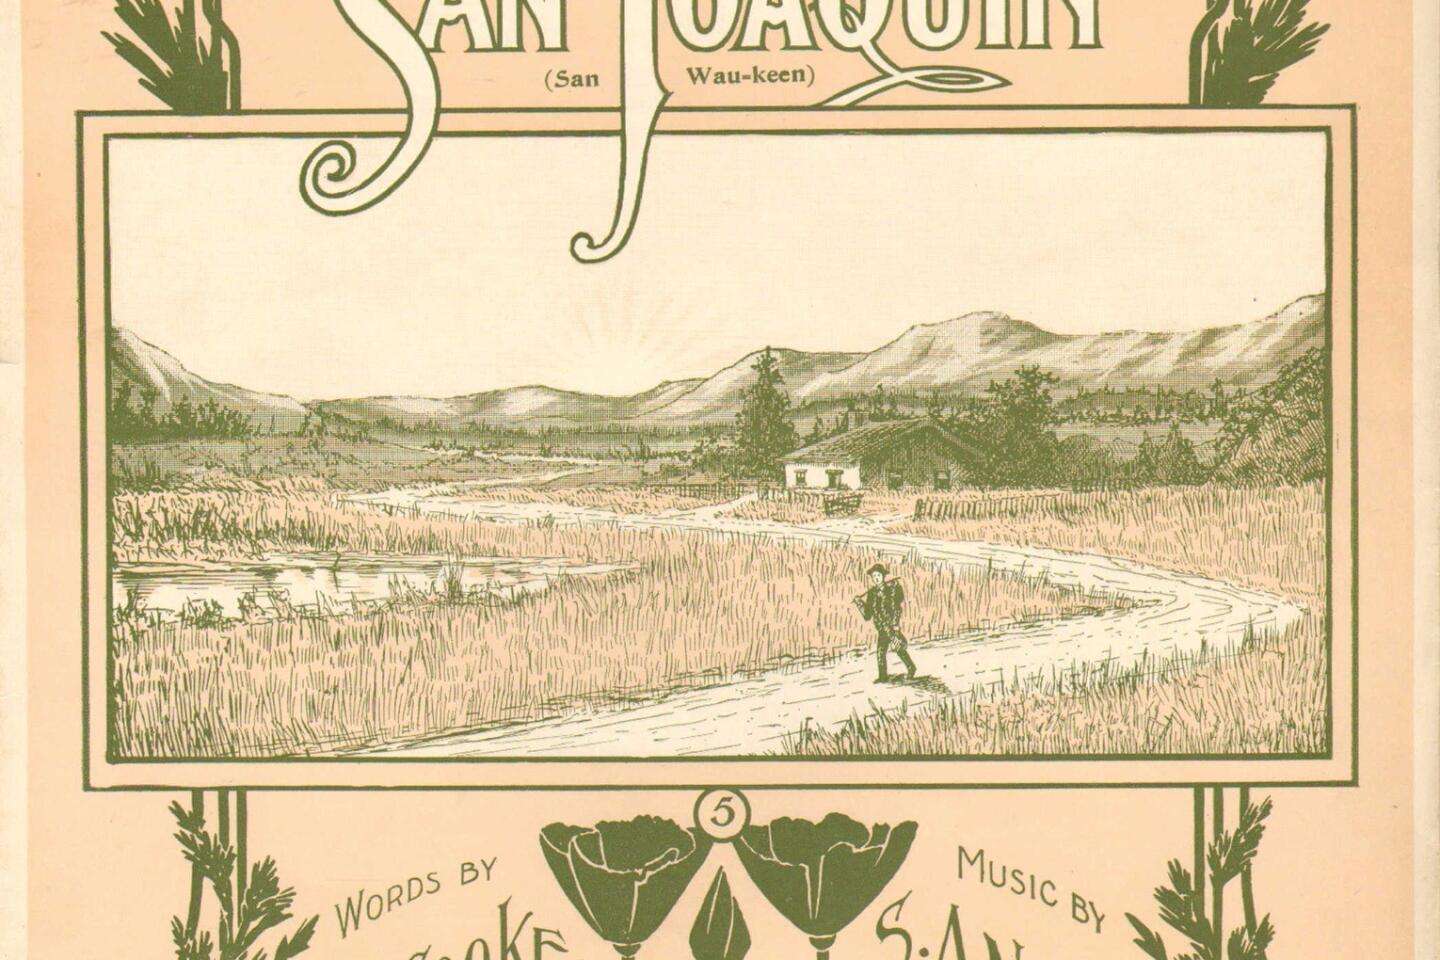 The cover for the 1904 sheet music "In the Valley of the San Joaquin," with words by J.J. Cooke and music by S.A. Nichols. The sheet music is part of the 2013 book, "Songs in the Key of Los Angeles: Sheet Music From the Collection of the Los Angeles Public Library."